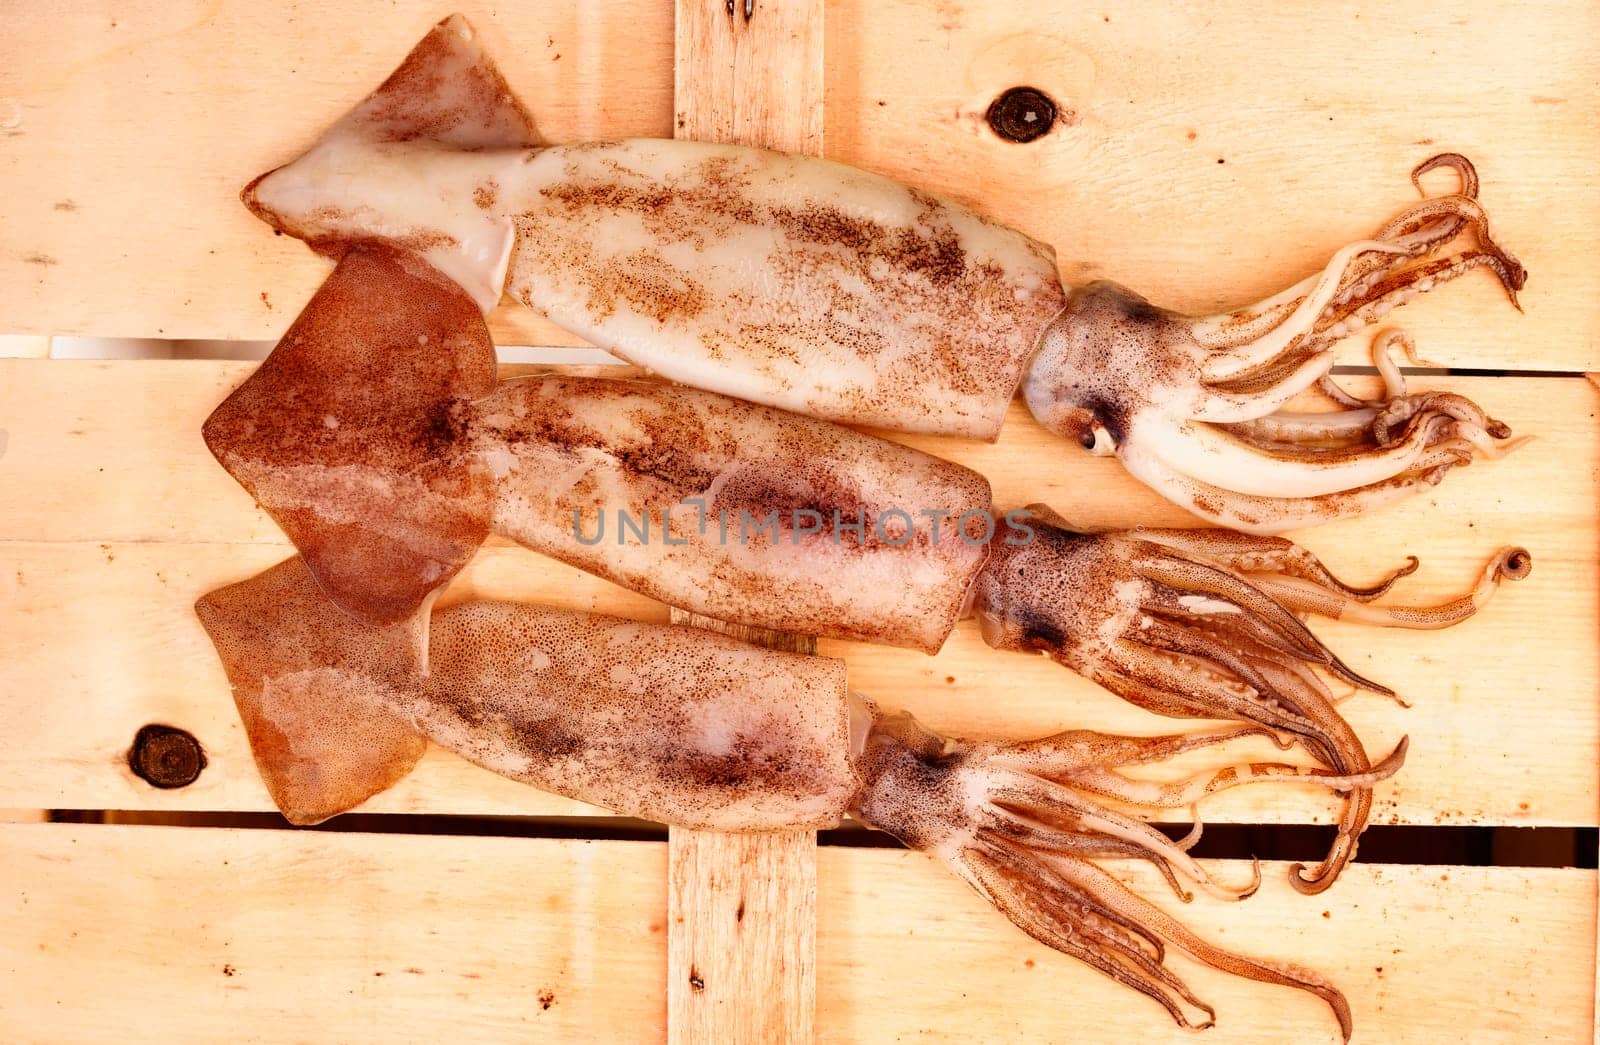  Flying squid fish on wooden background by victimewalker